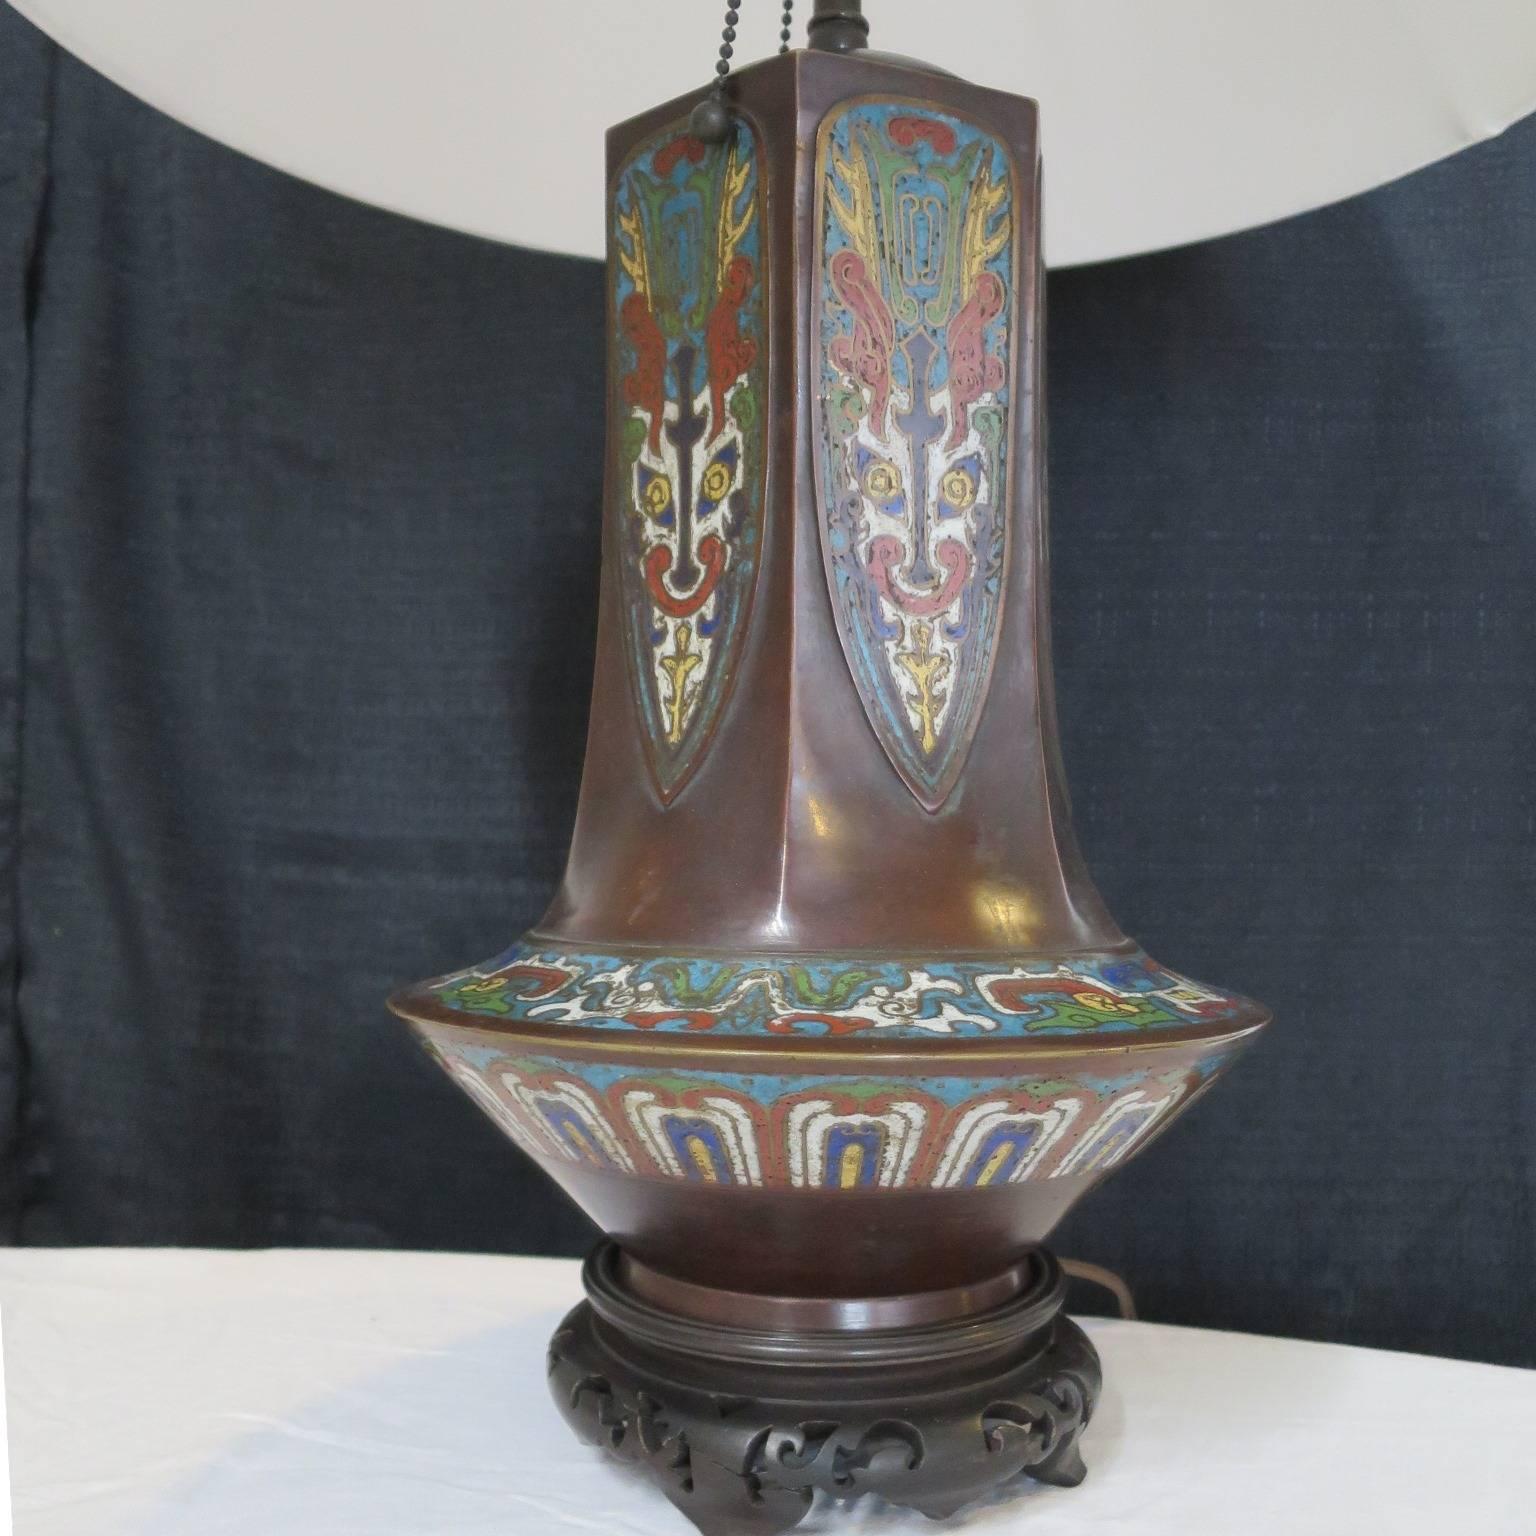 Chinese Cloisonné Enamel Bronze Vase 19th Century Mounted as a Table Lamp For Sale 1